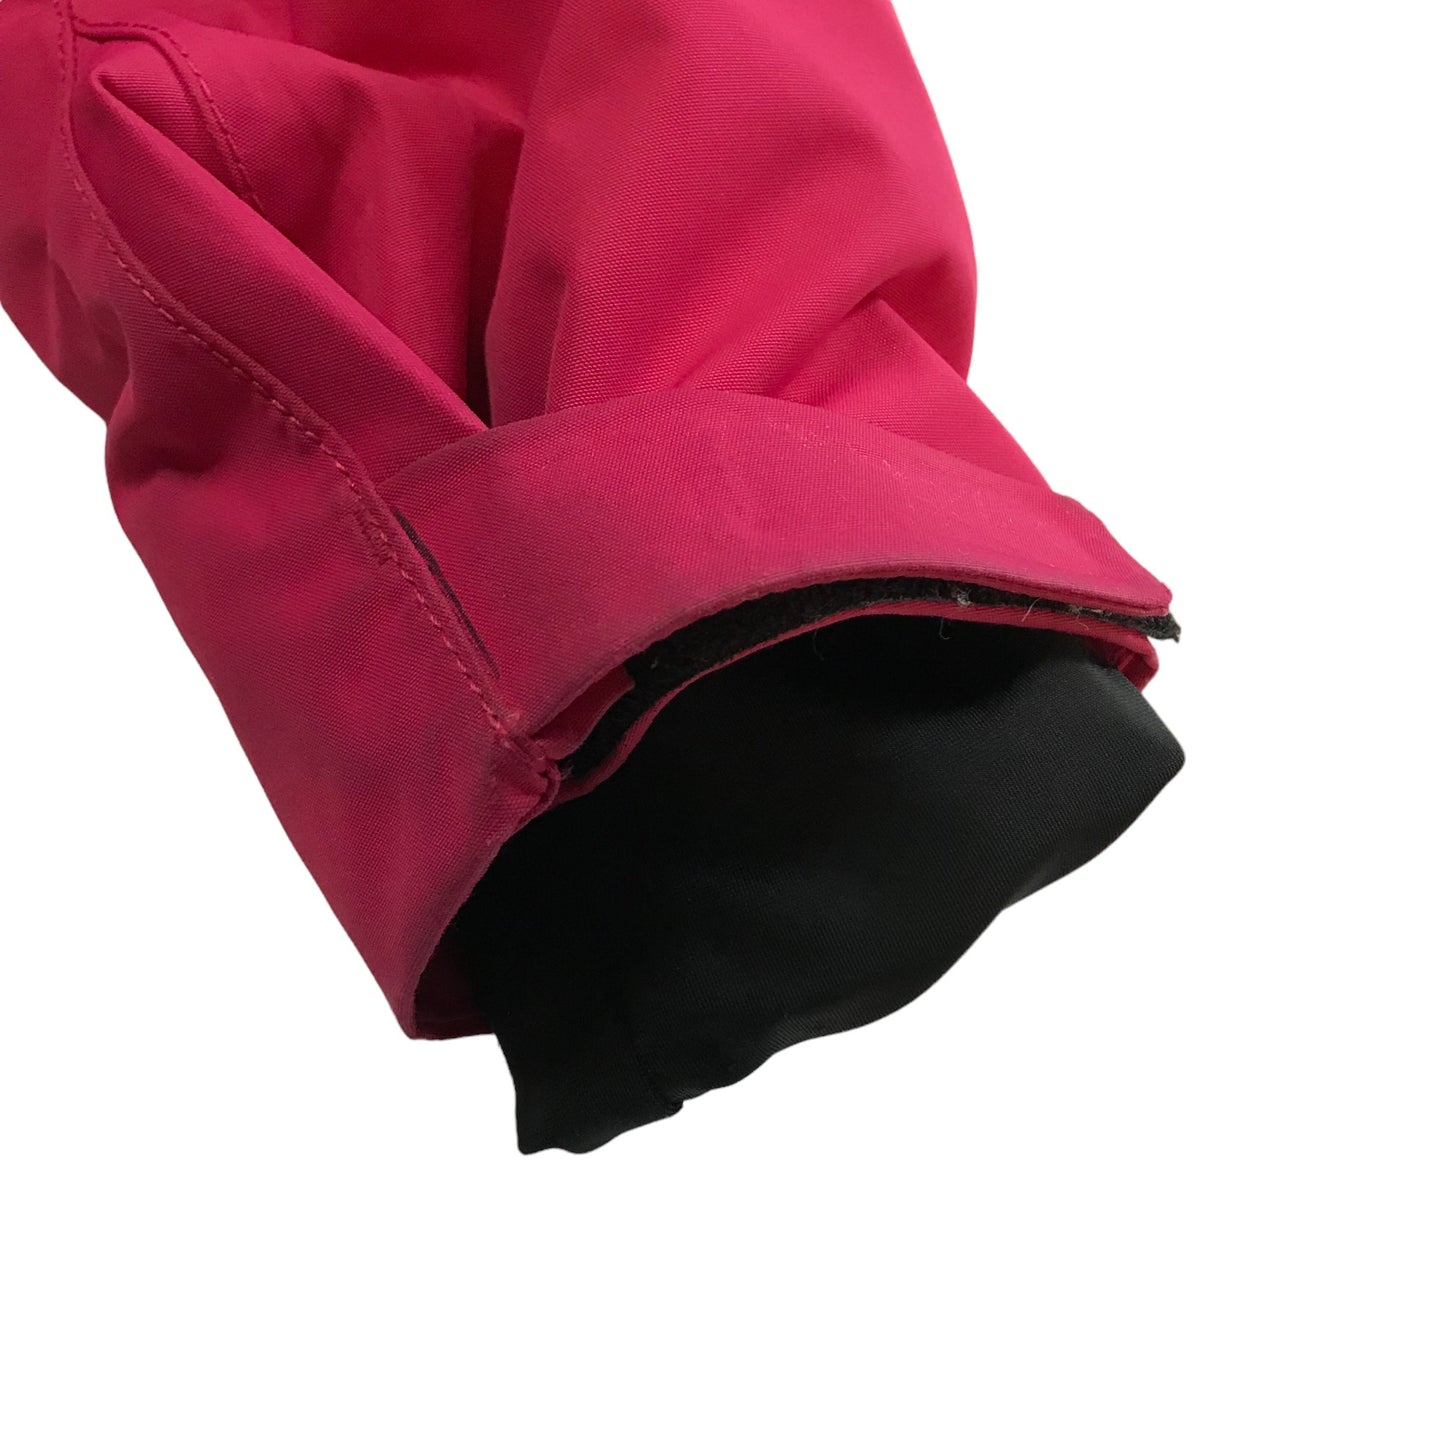 Reima Jacket Age 9-10 Pink Water Resistant Hard Shell